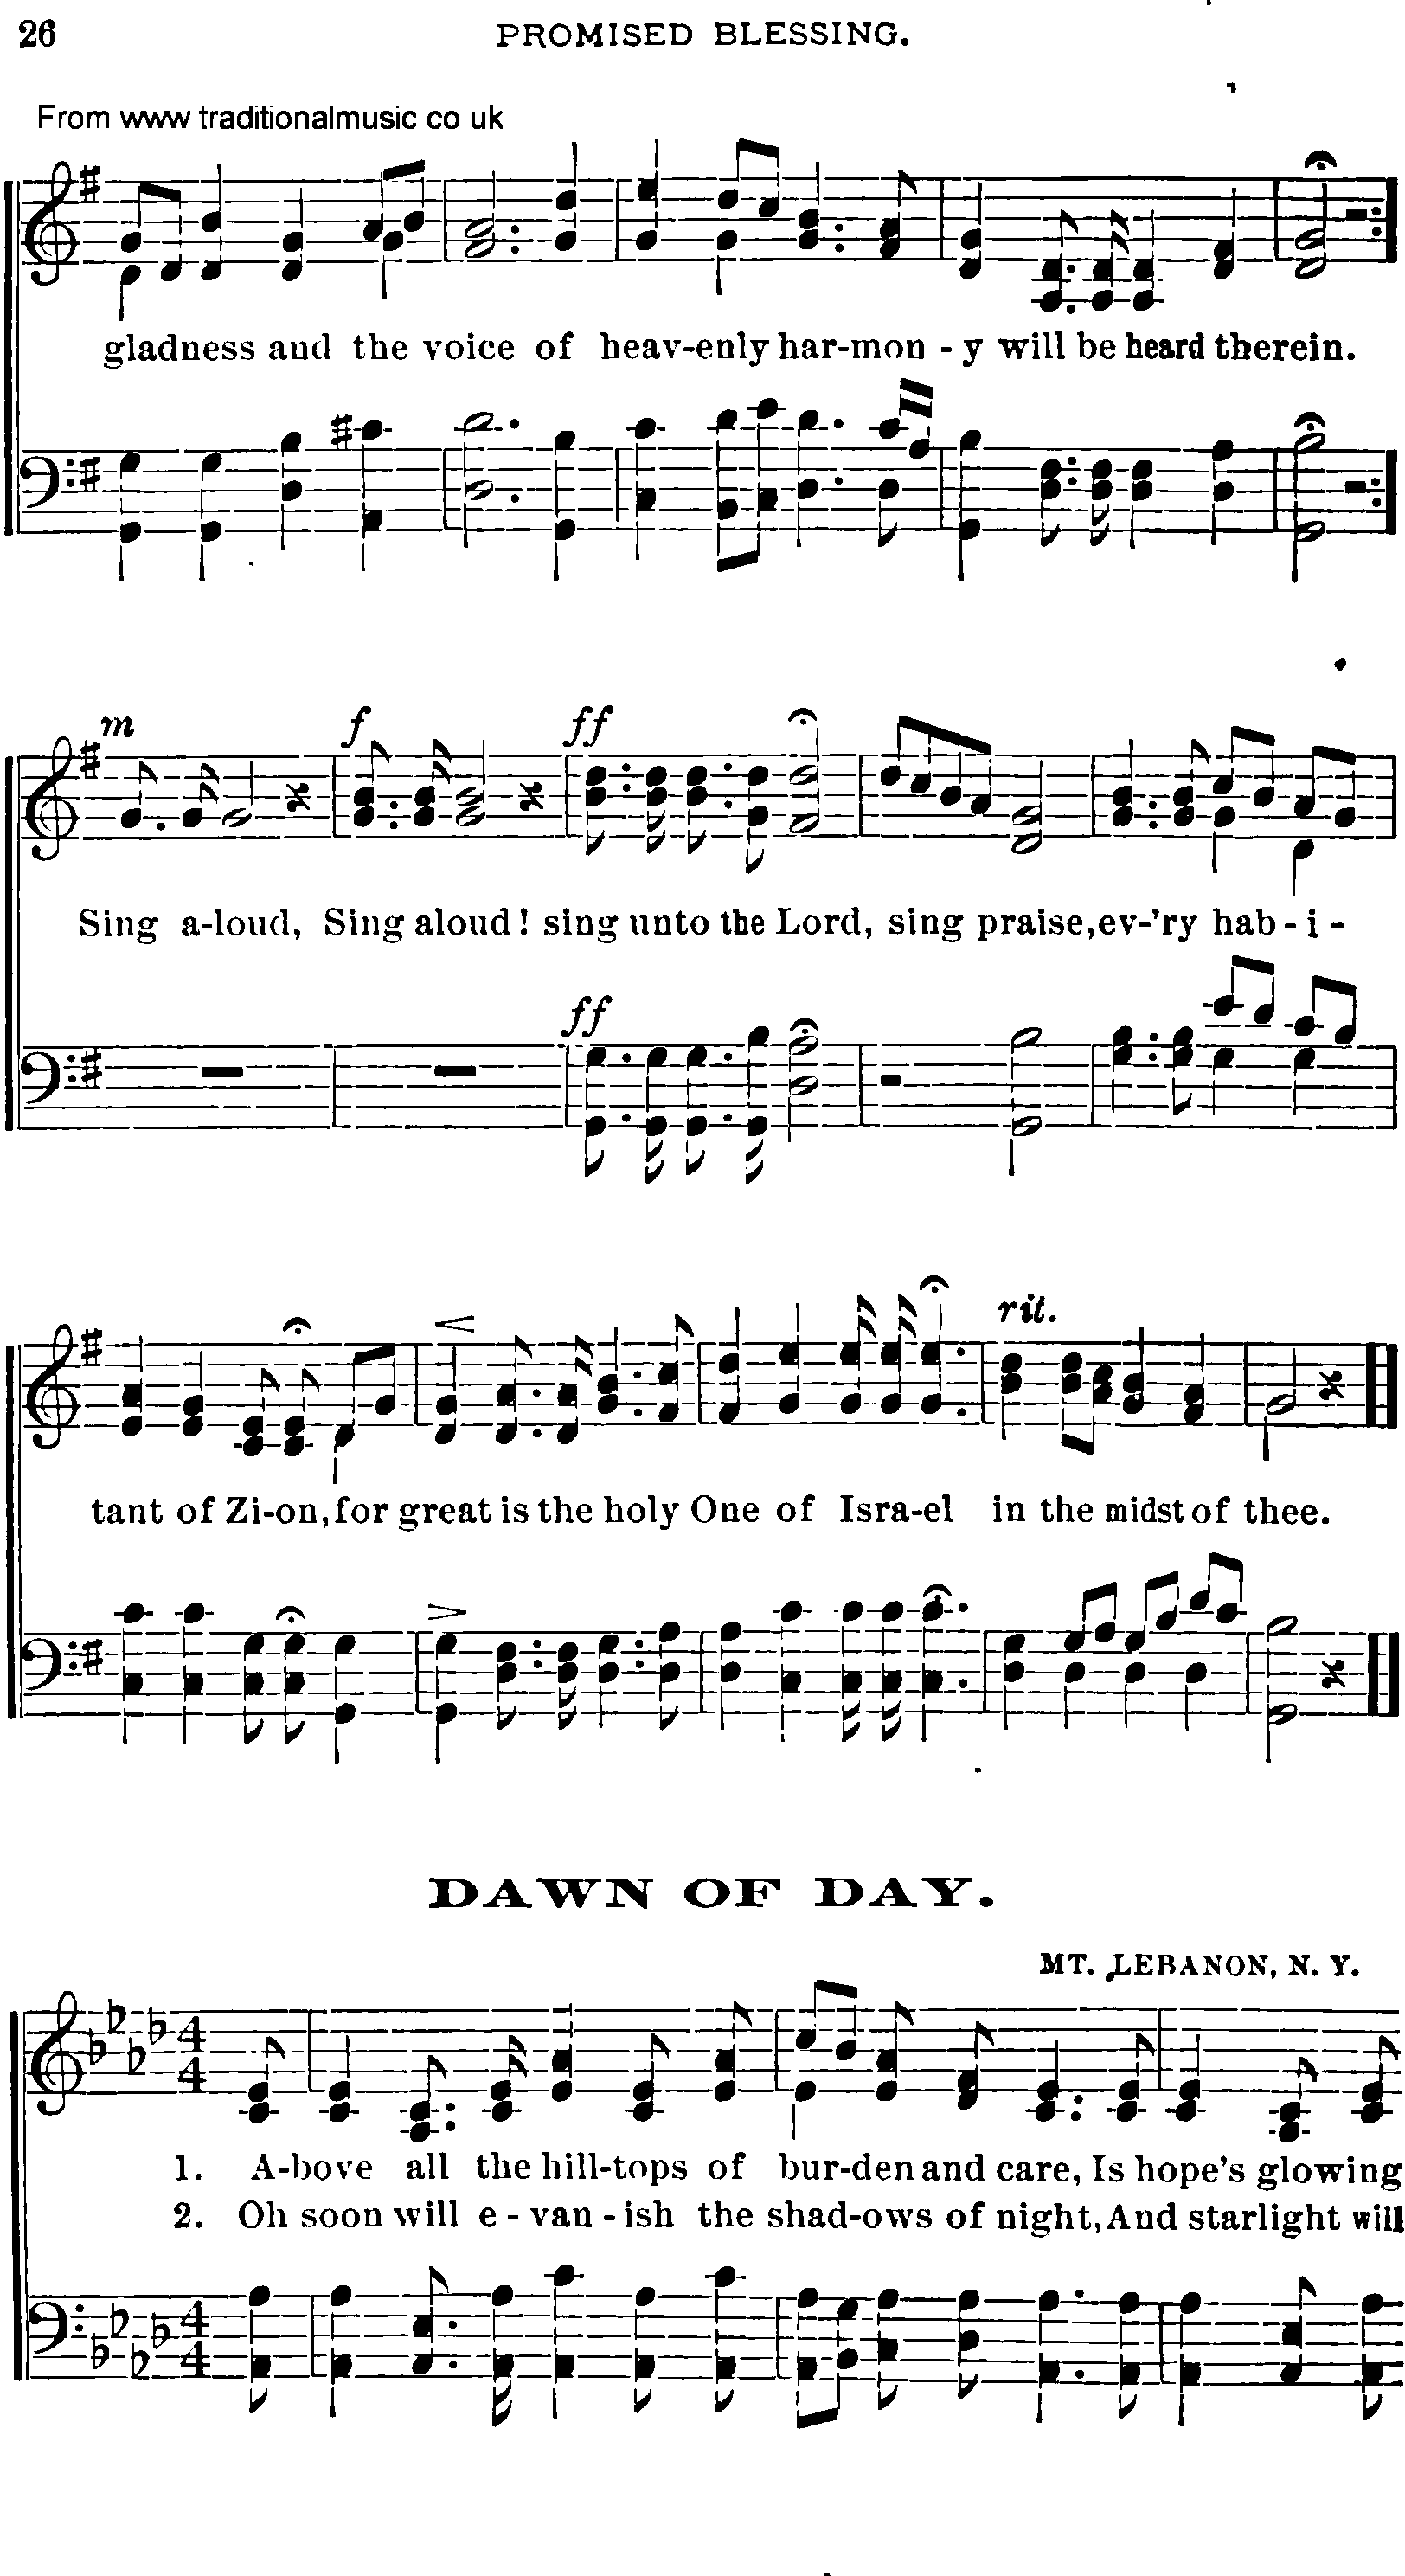 Shaker Music collection, Hymn: dawn of day, sheetmusic and PDF